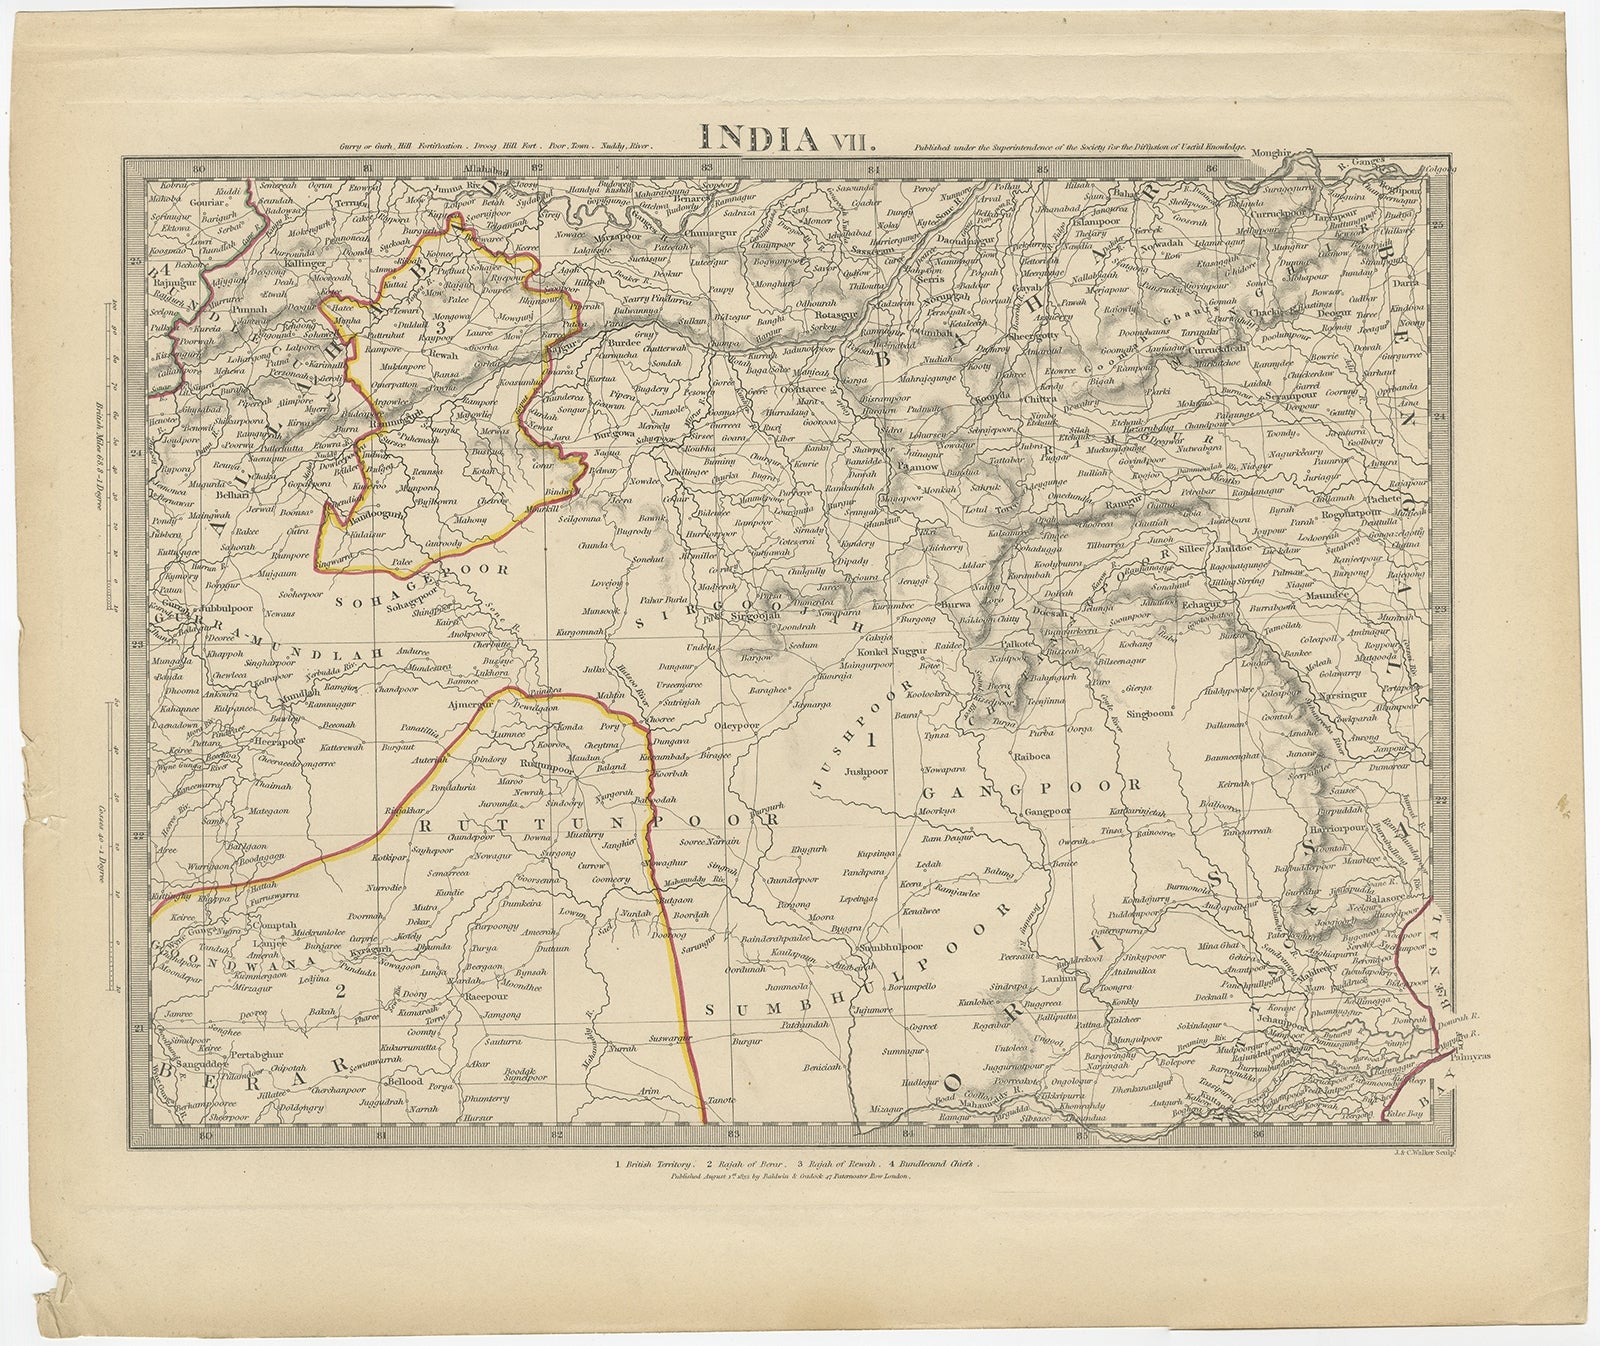 Antique map titled 'India VII'. Old steel engraved map of part of India including the Rajah of Berar, the Rajah of Rewah and British Territory. 

Artists and Engravers: Engraved by J. & C. Walker. Published under the superintendence of the Society